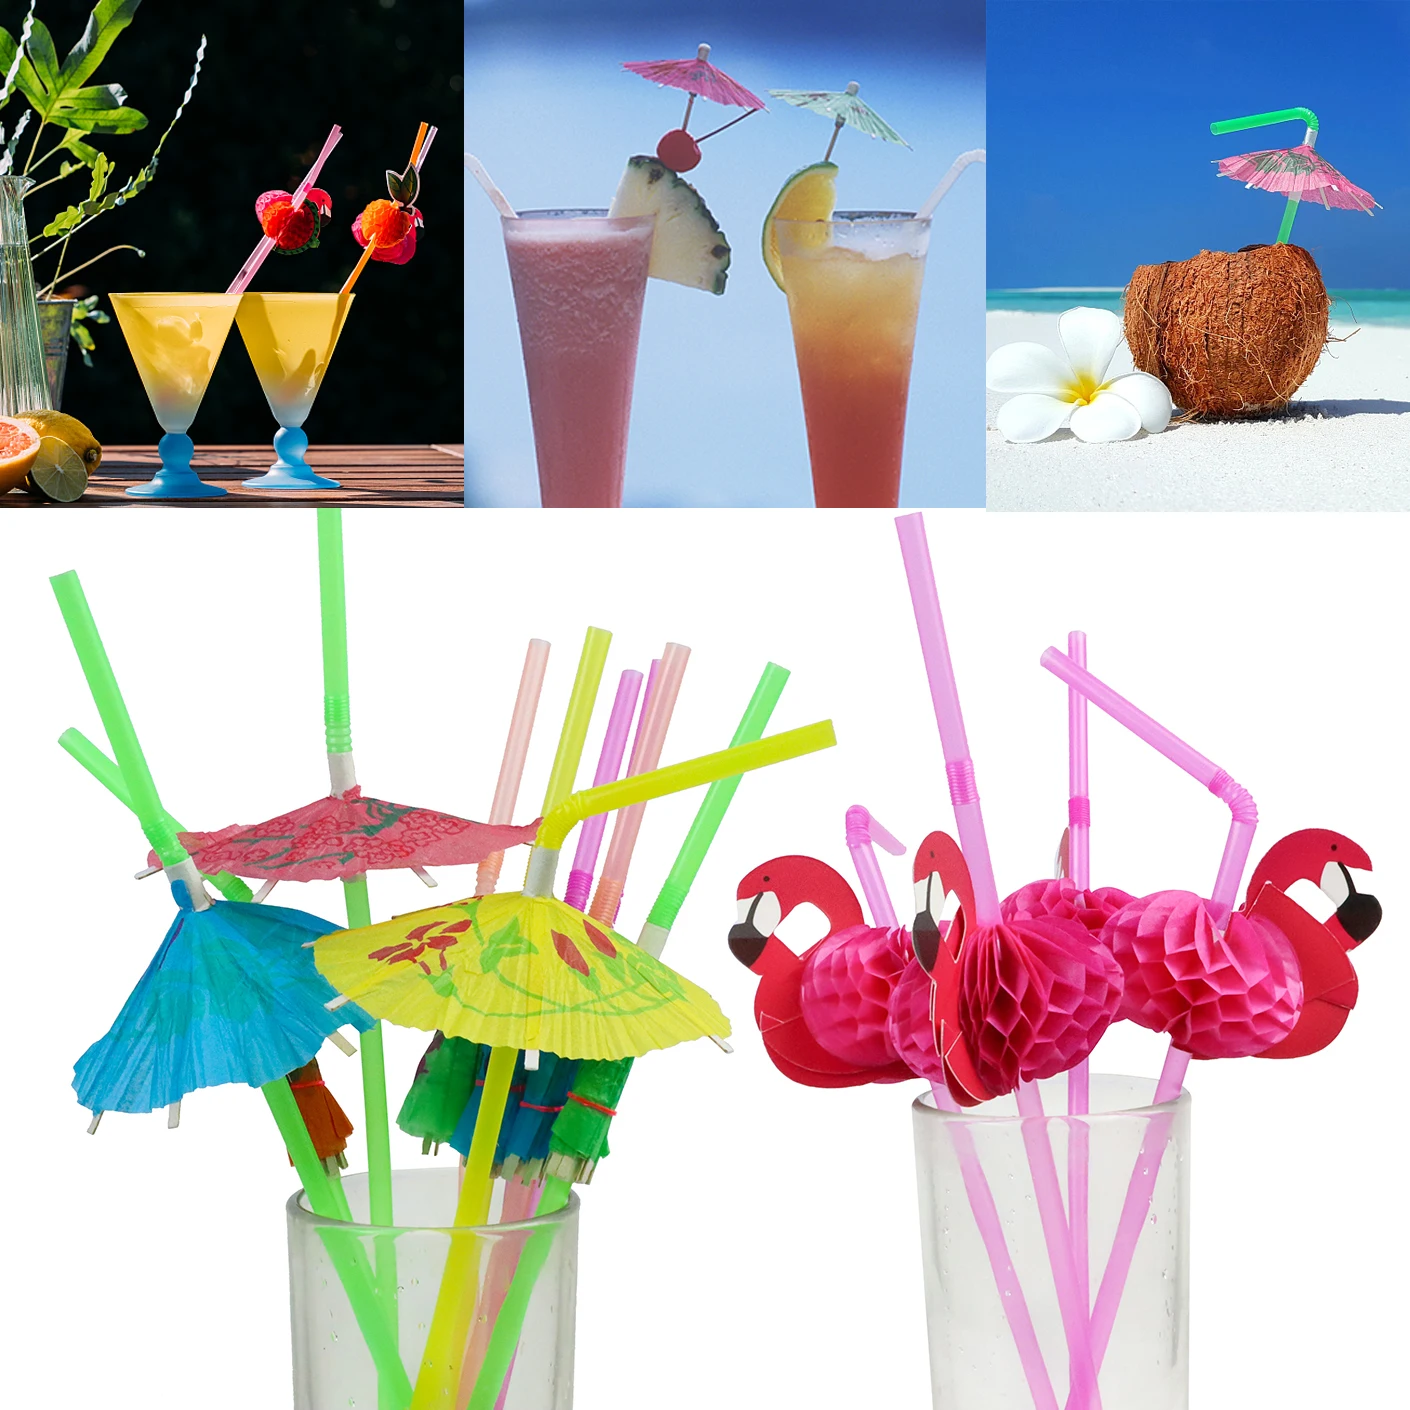 

Summer Party Flamingo Straw Pineapple Paper Umbrella straw Cake Toppers Hawaiian Beach Party Decor Cupcake Topper for Birthday